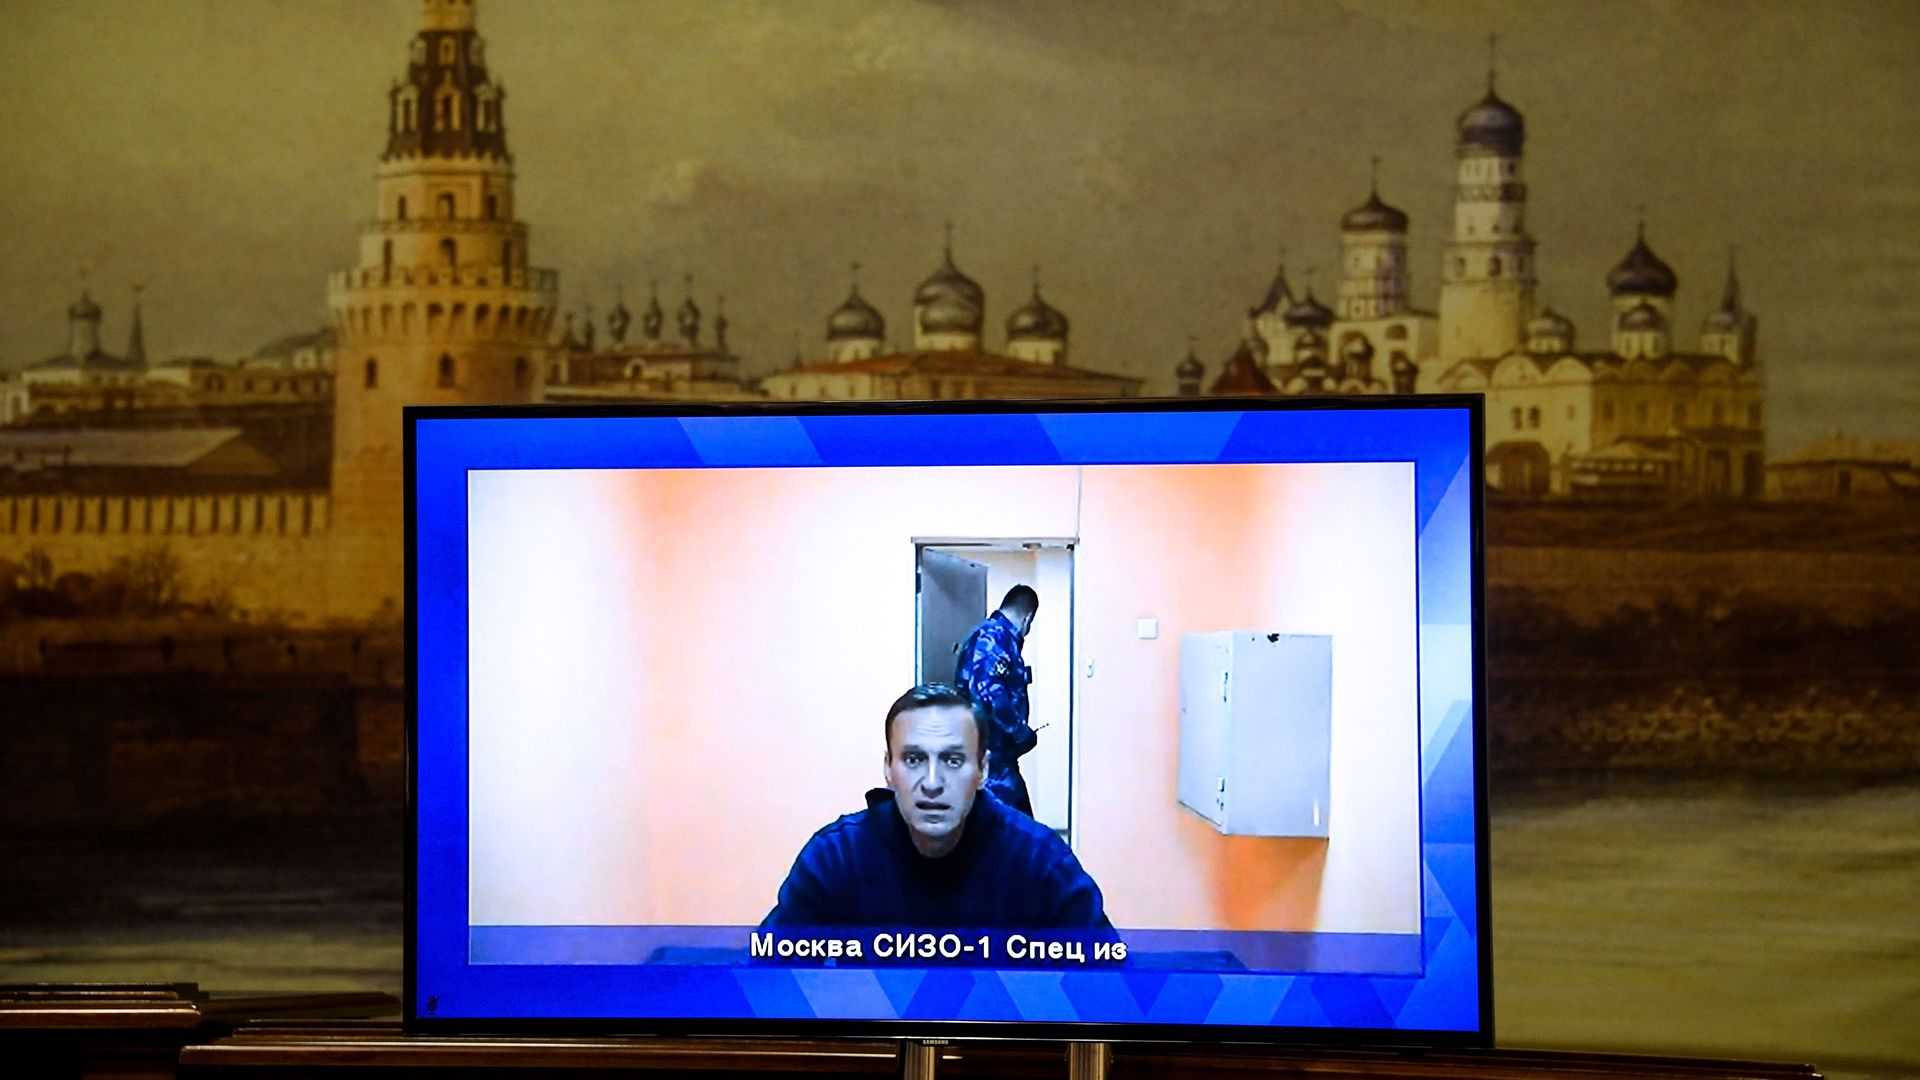 Opposition leader Alexei Navalny appearing on a screen while speaking from prison in January 2021.